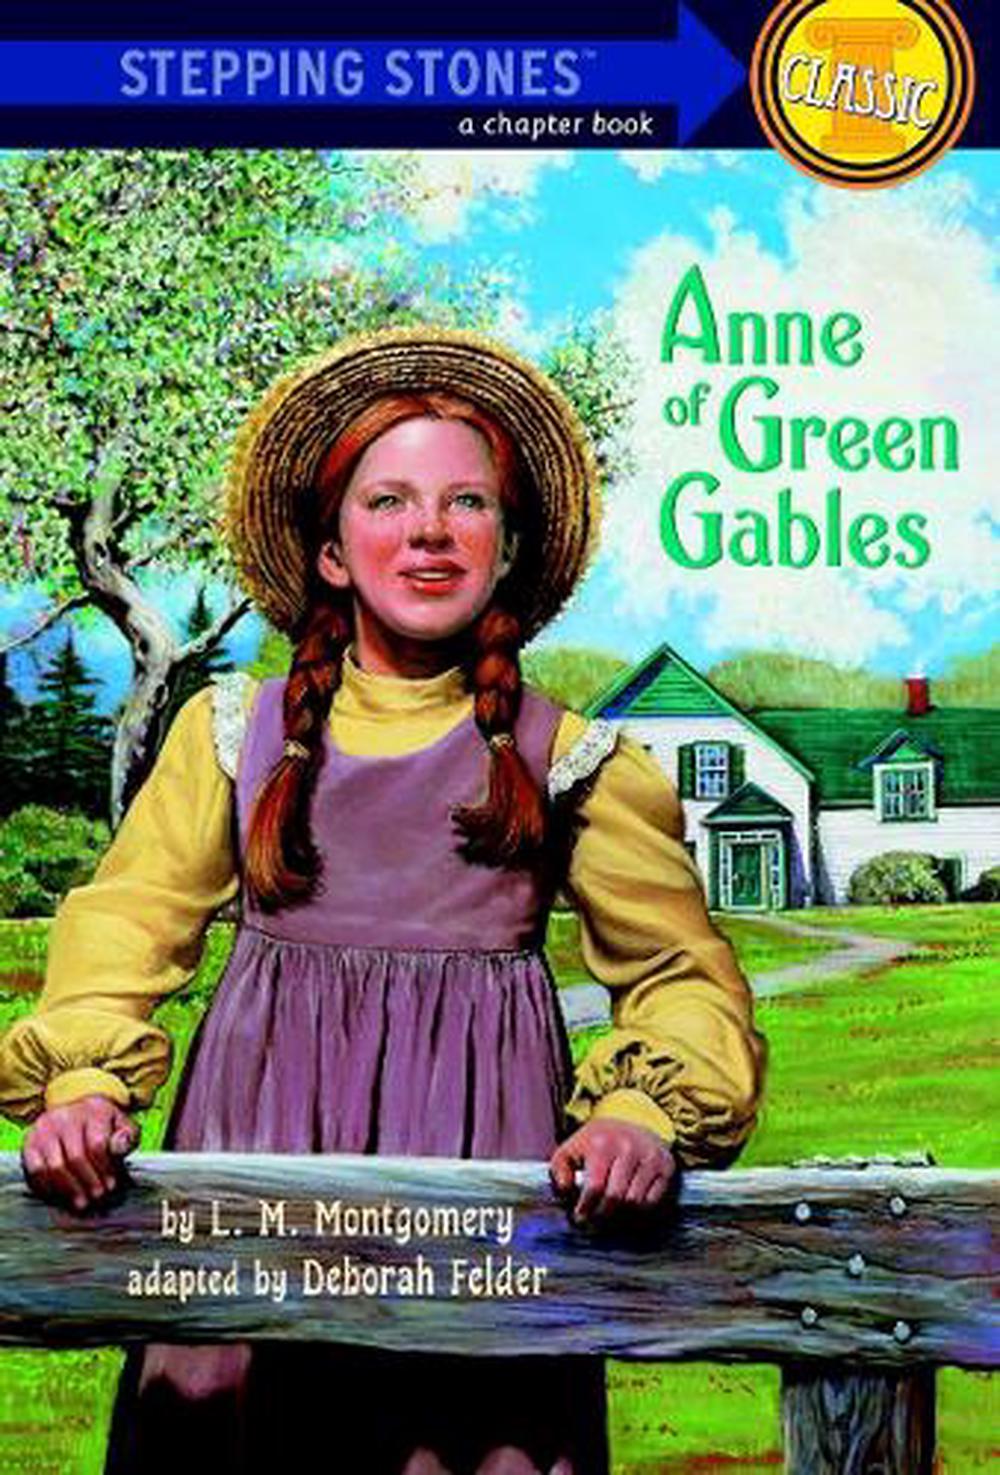 anne from green gables book series